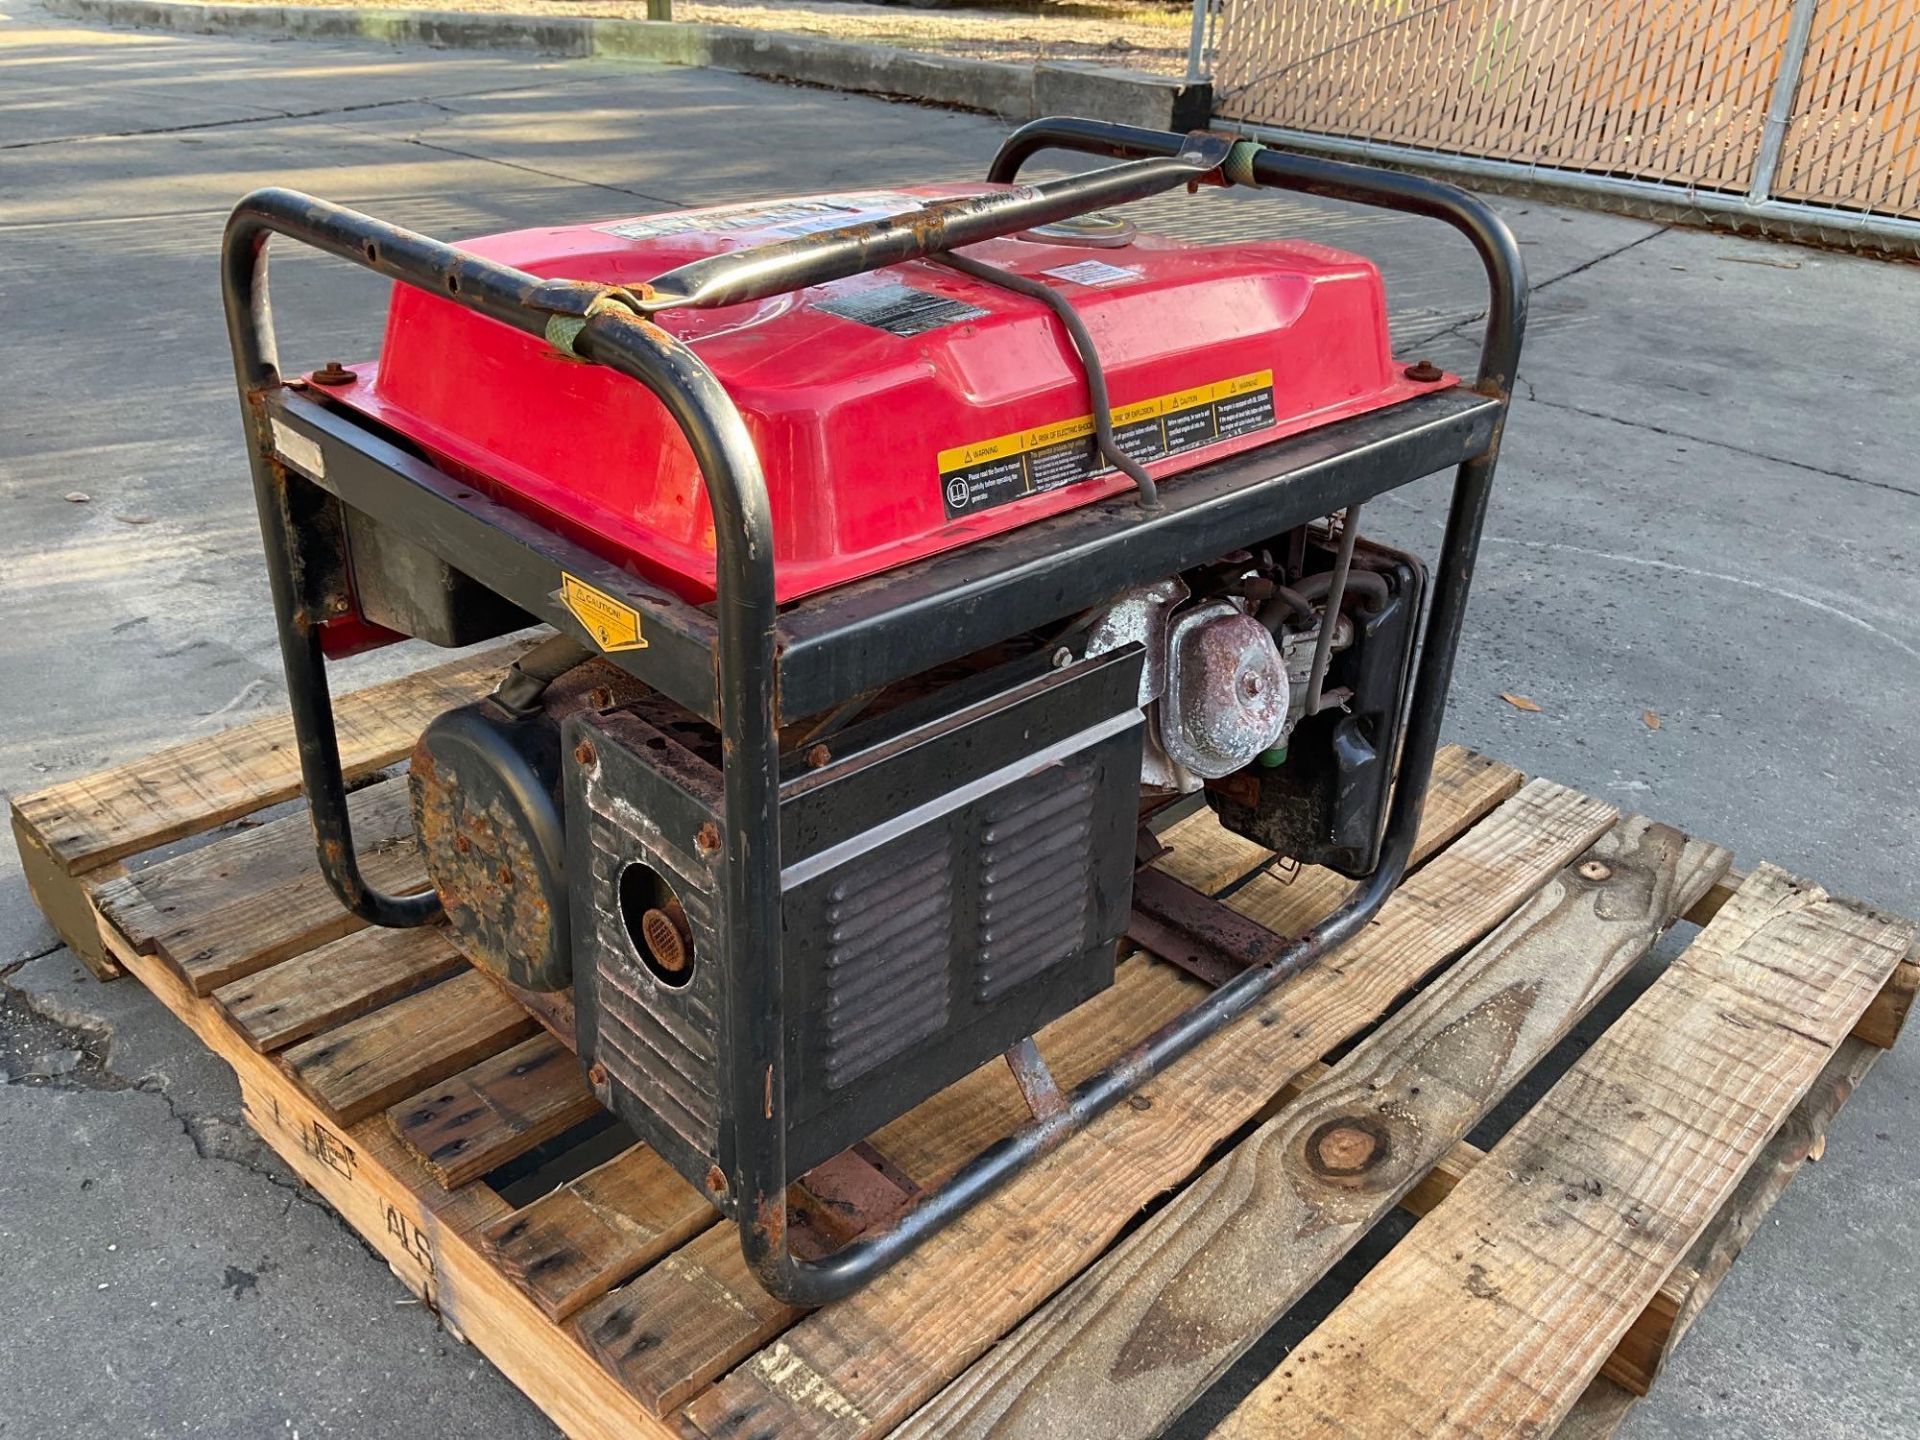 GENTRON PRO2 7500W GENERATOR MIDEL GG7500, GAS POWERED, APPROX 120/240 RATED VOLTS, SINGLE PHASE, - Image 14 of 21